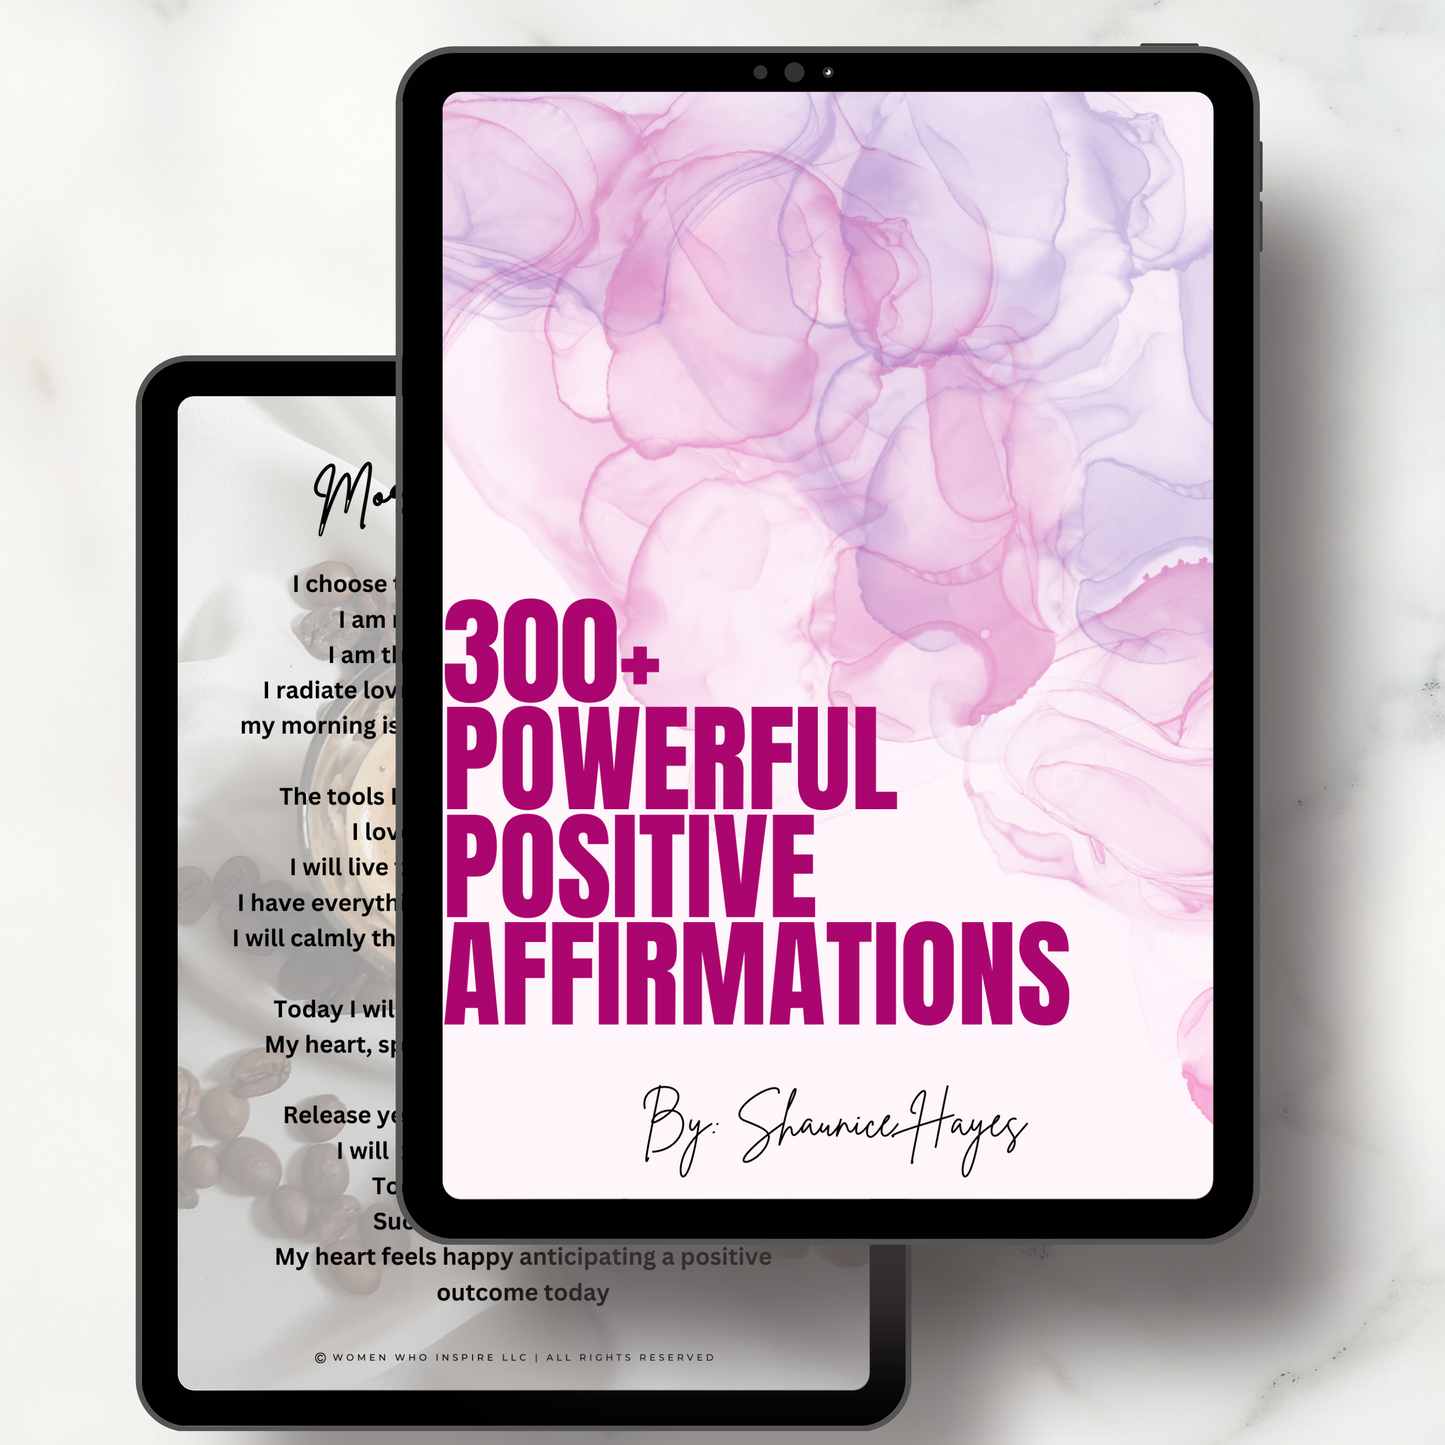 300+ Powerful Positive Affirmations E-book